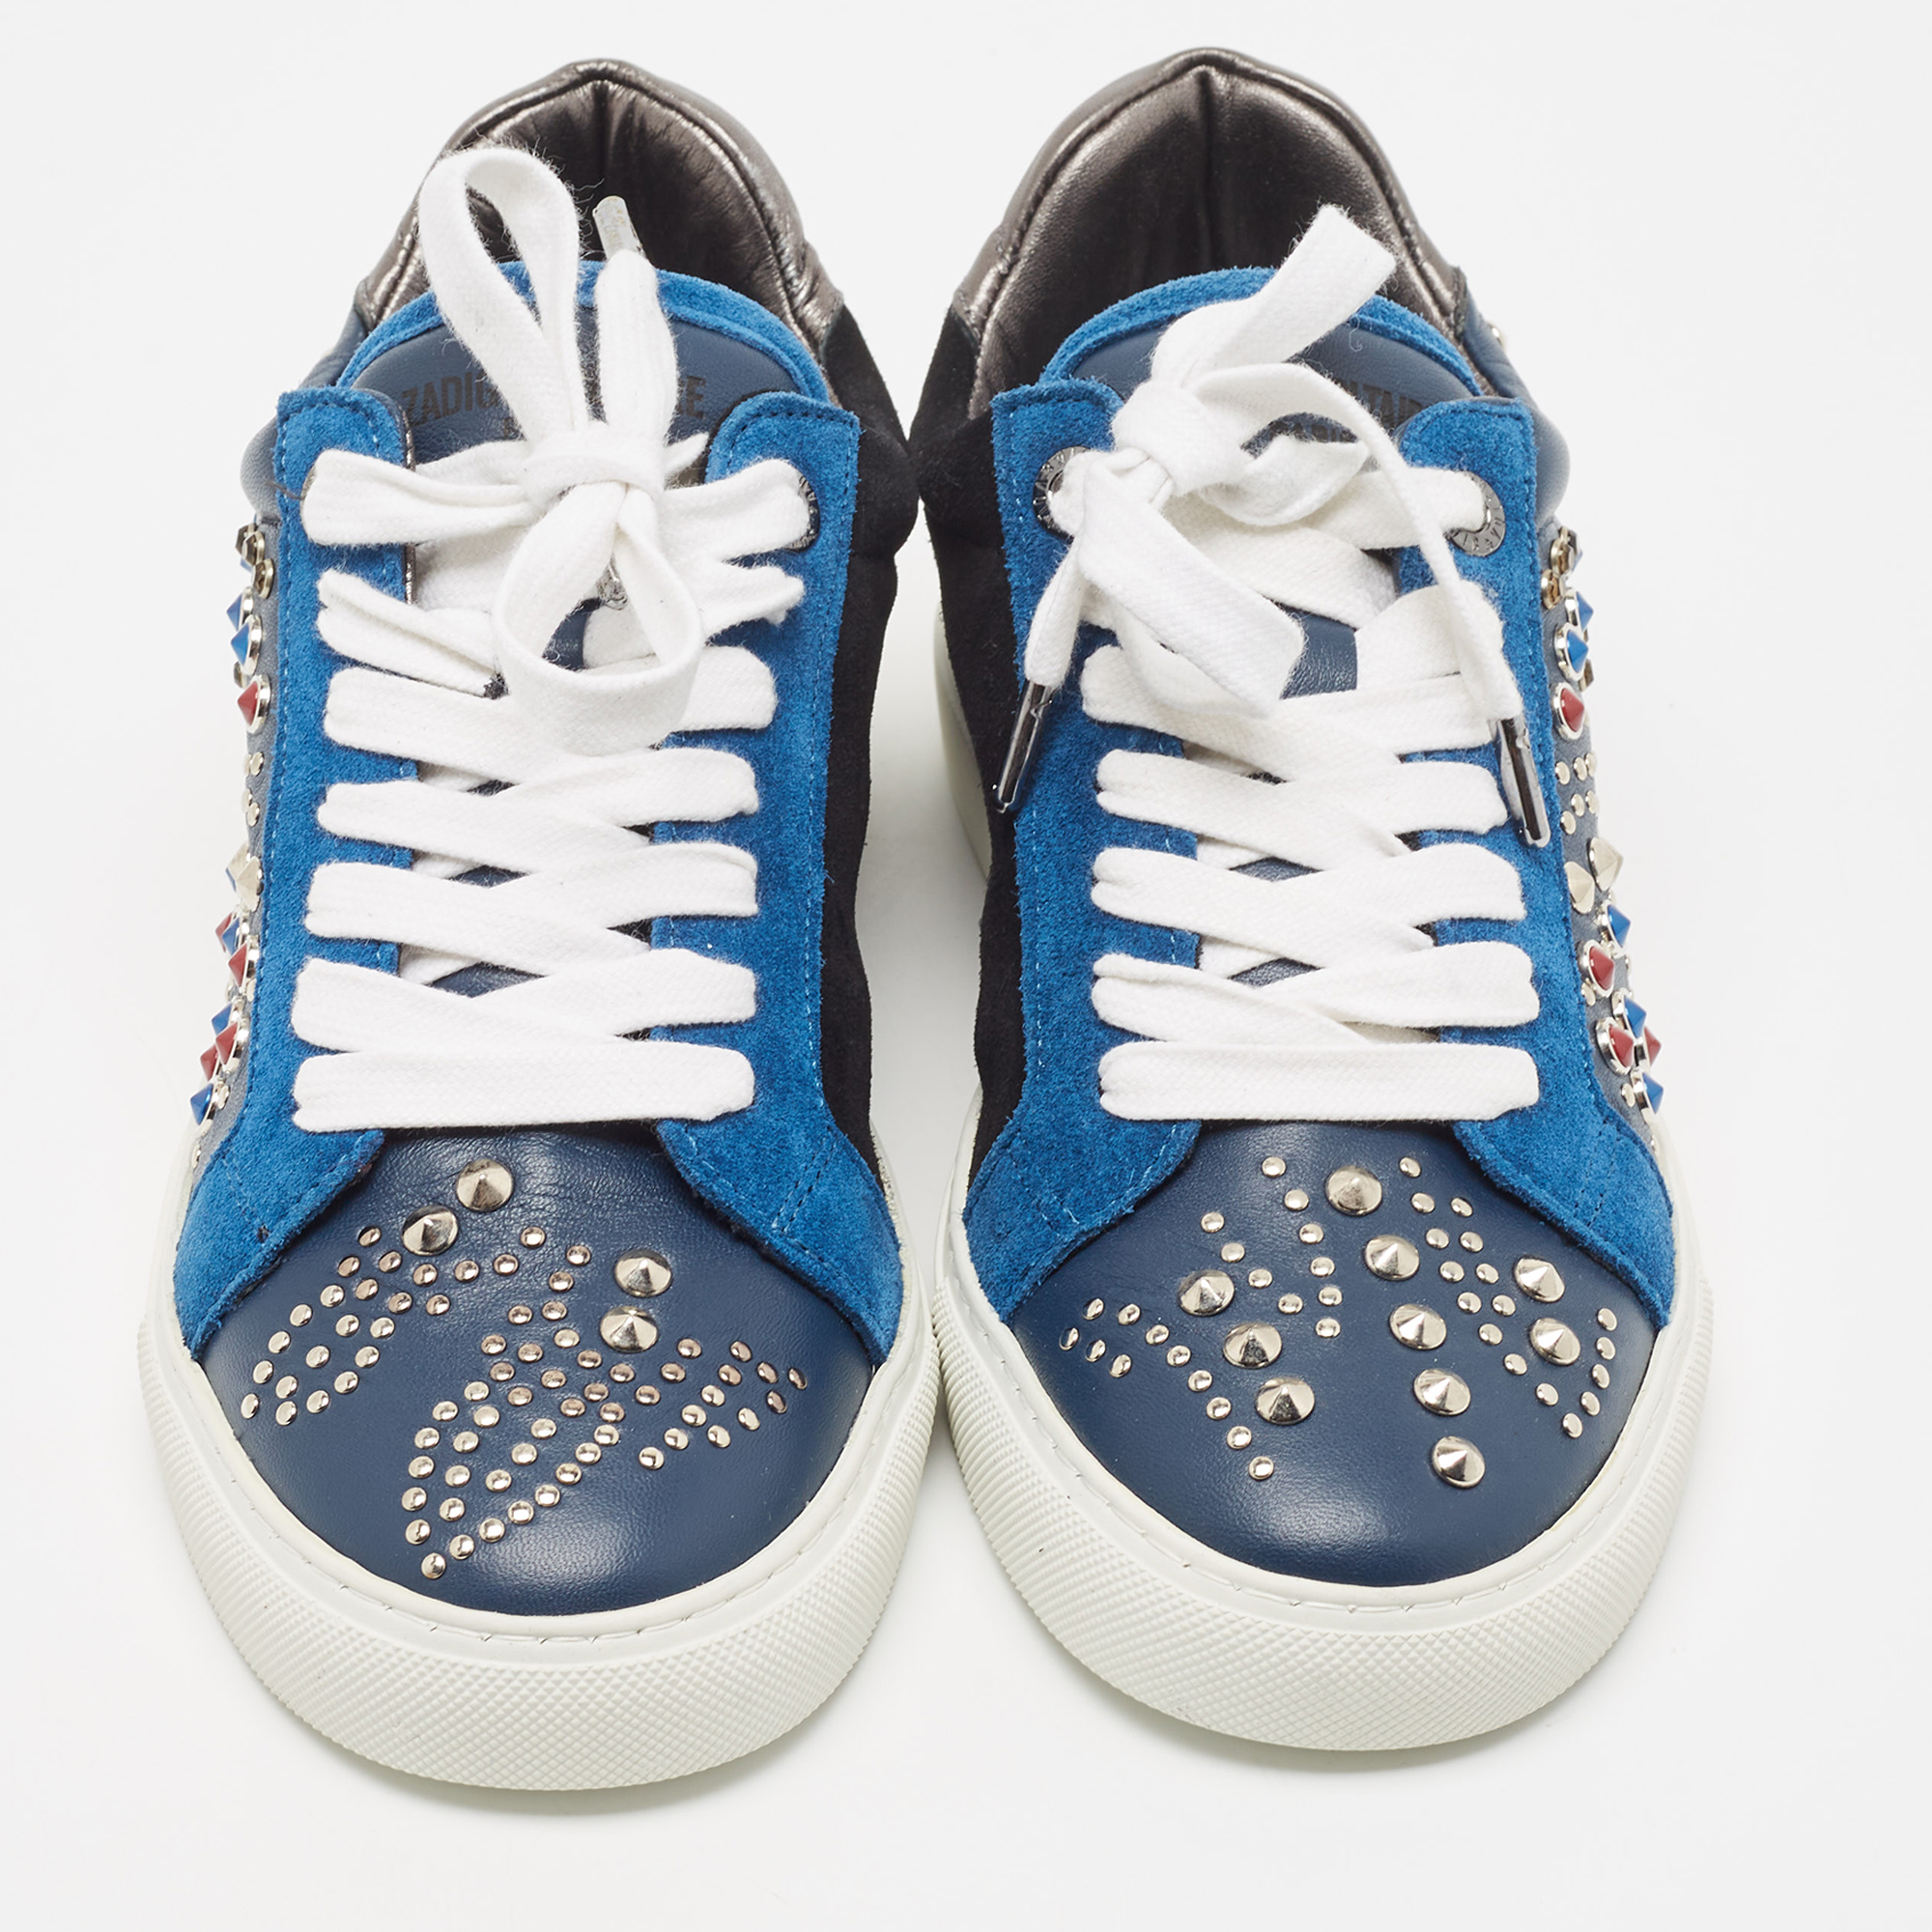 Zadig And Voltaire Tricolor Studded Leather And Suede Jungle Clous Sneakers Size 38